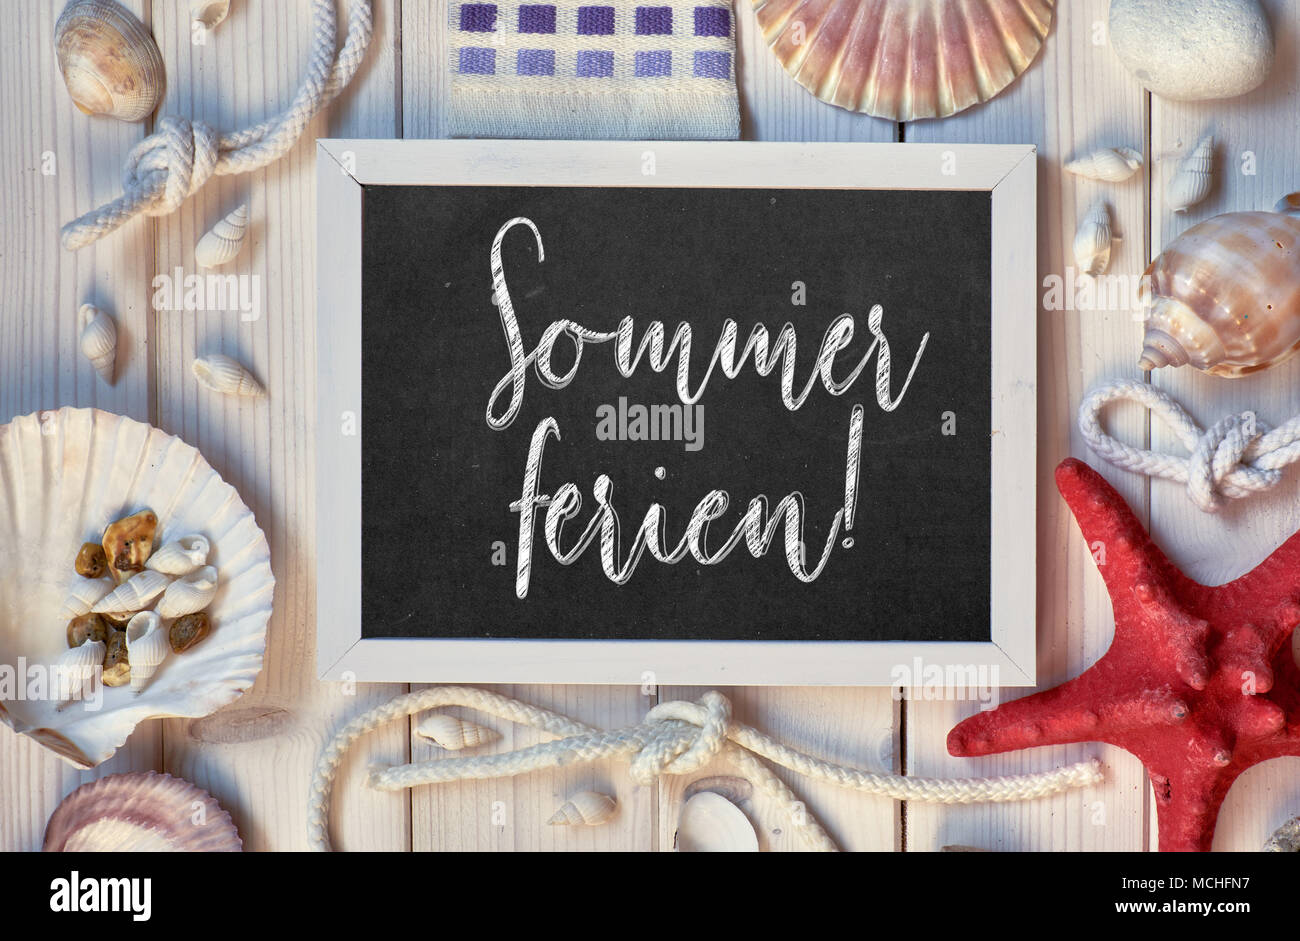 Blackboard With Maritime Decorations on light wood, text in German, 'Sommerferien' Means 'Summer Holidays' Stock Photo